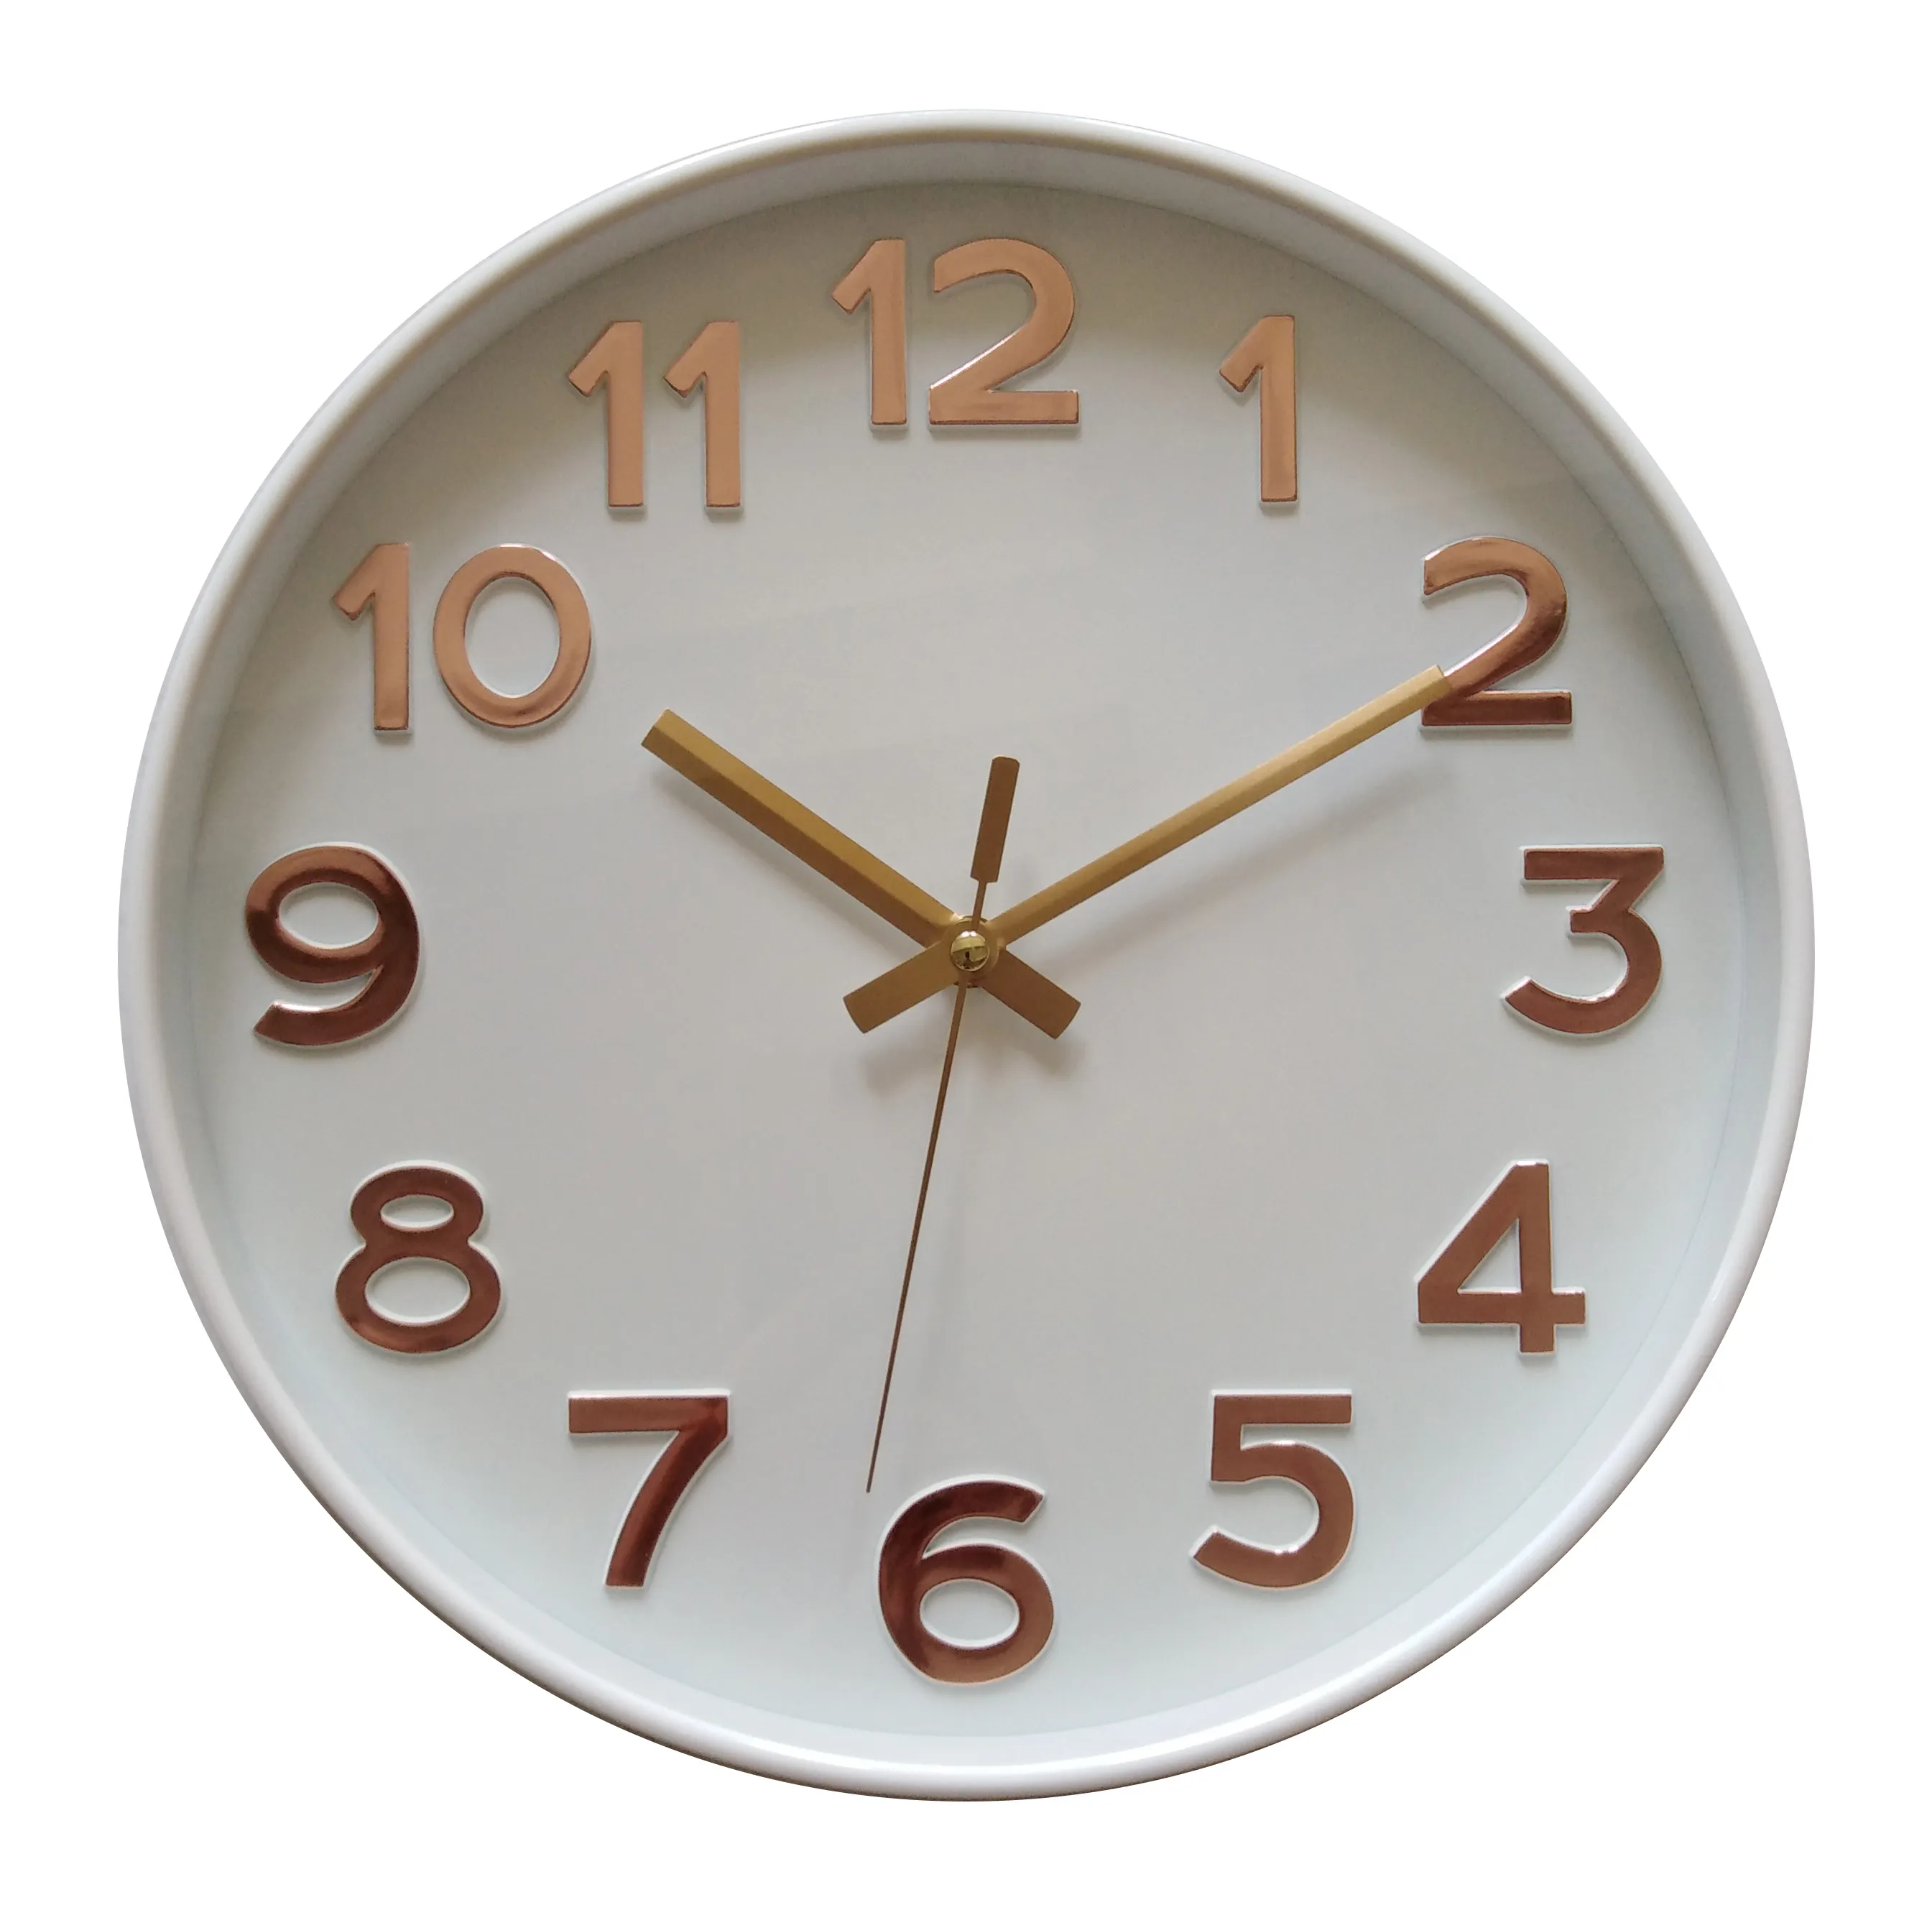 12 inch modern home decorative gold 3D fine numbers plastic wall clock